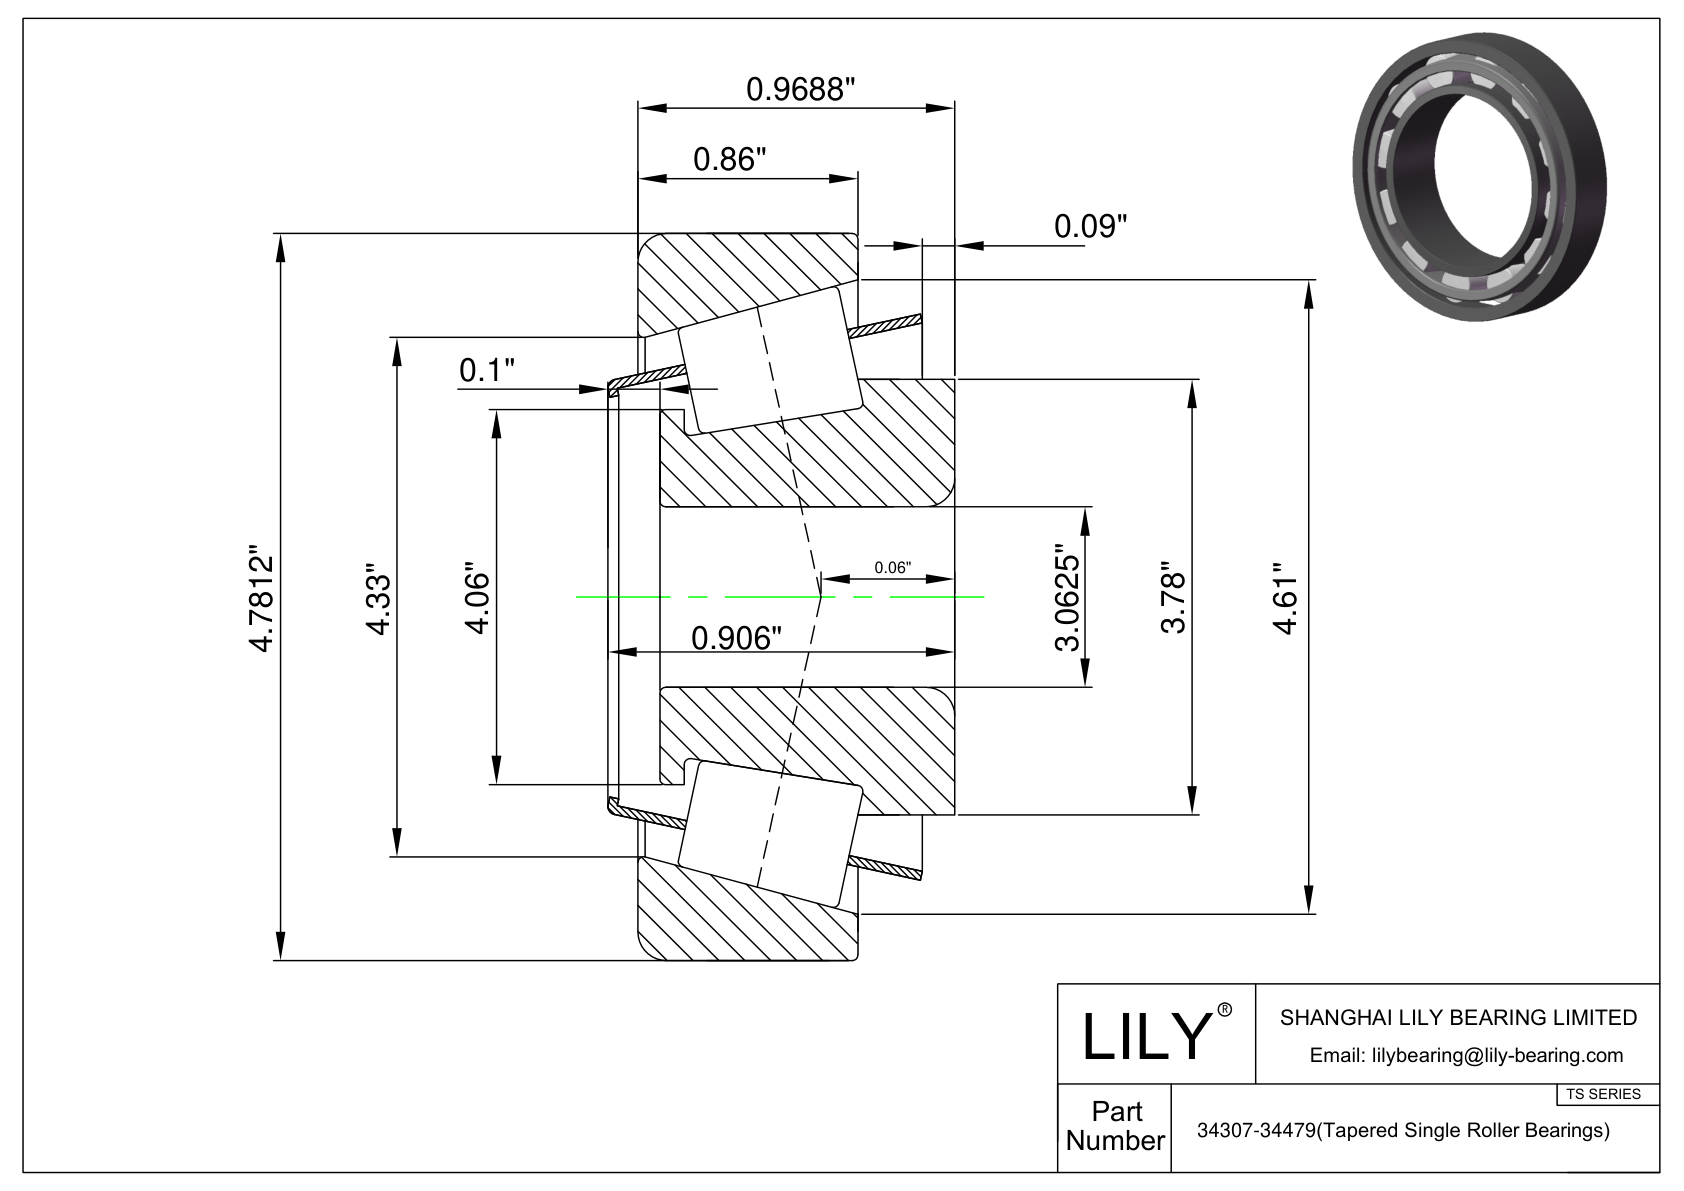 34307-34479 TS (Tapered Single Roller Bearings) (Imperial) cad drawing